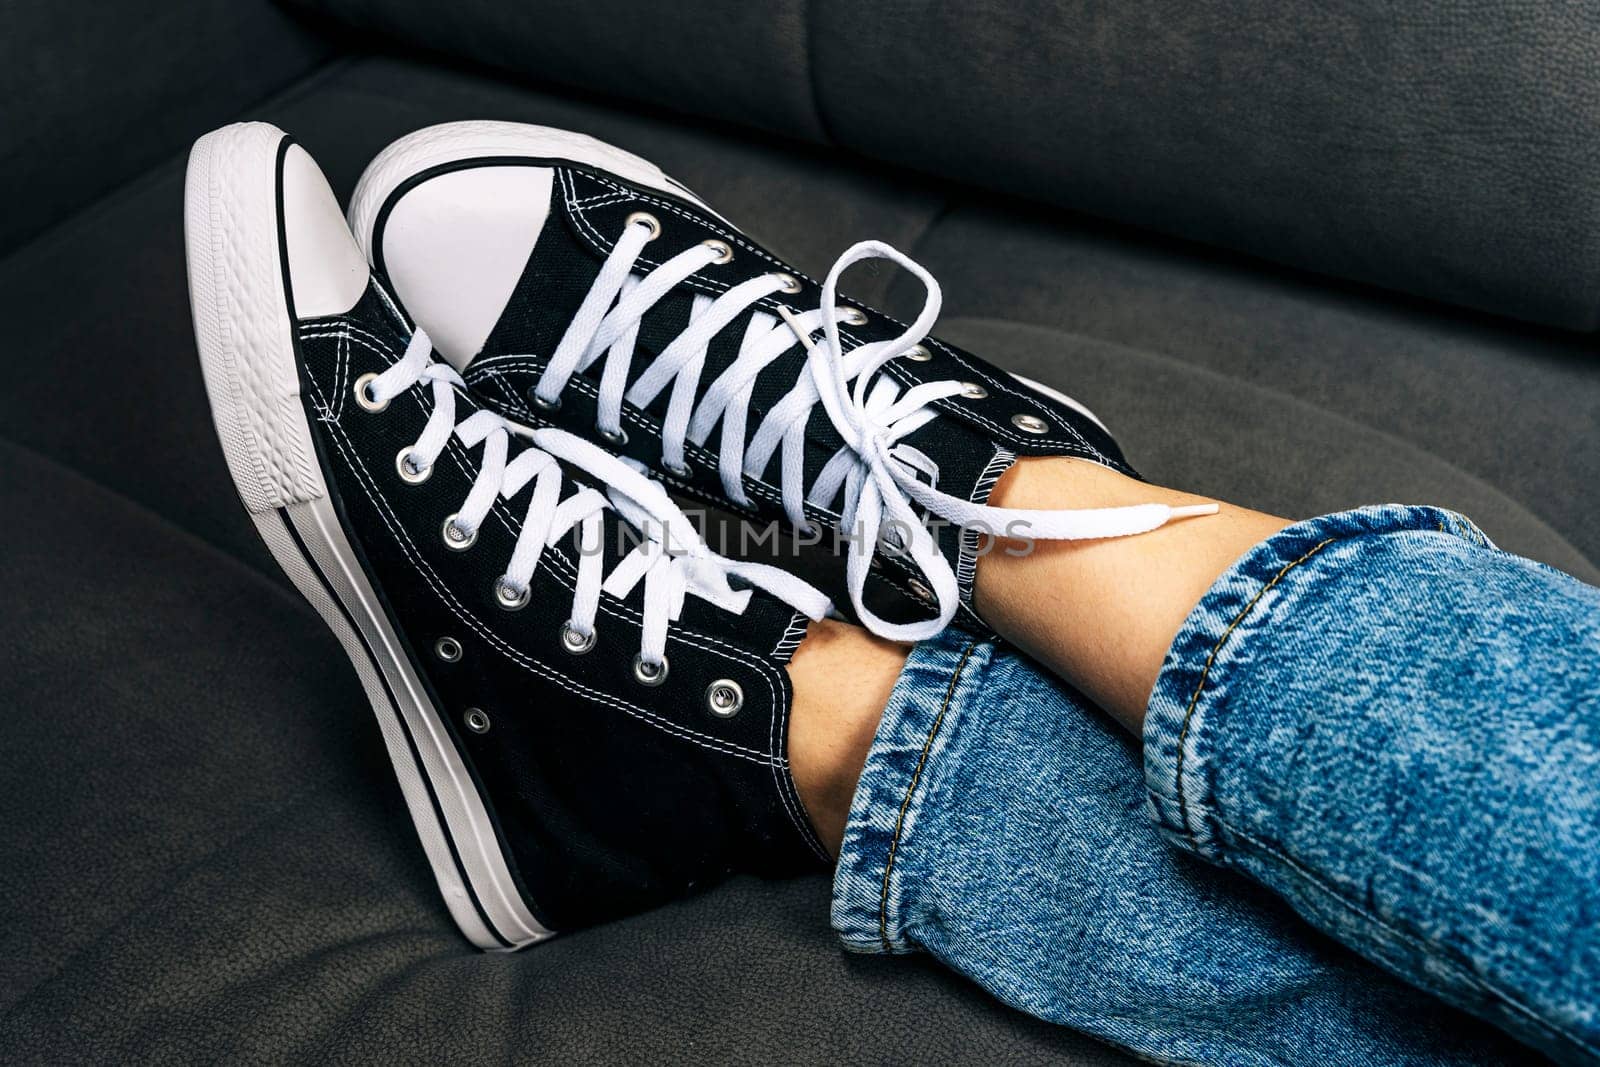 the girl's legs shod in classic sneakers. A sneakers on a girl's leg. Teenager's feet in casual new sneakers on the sofa close up image. Vintage style. concept image